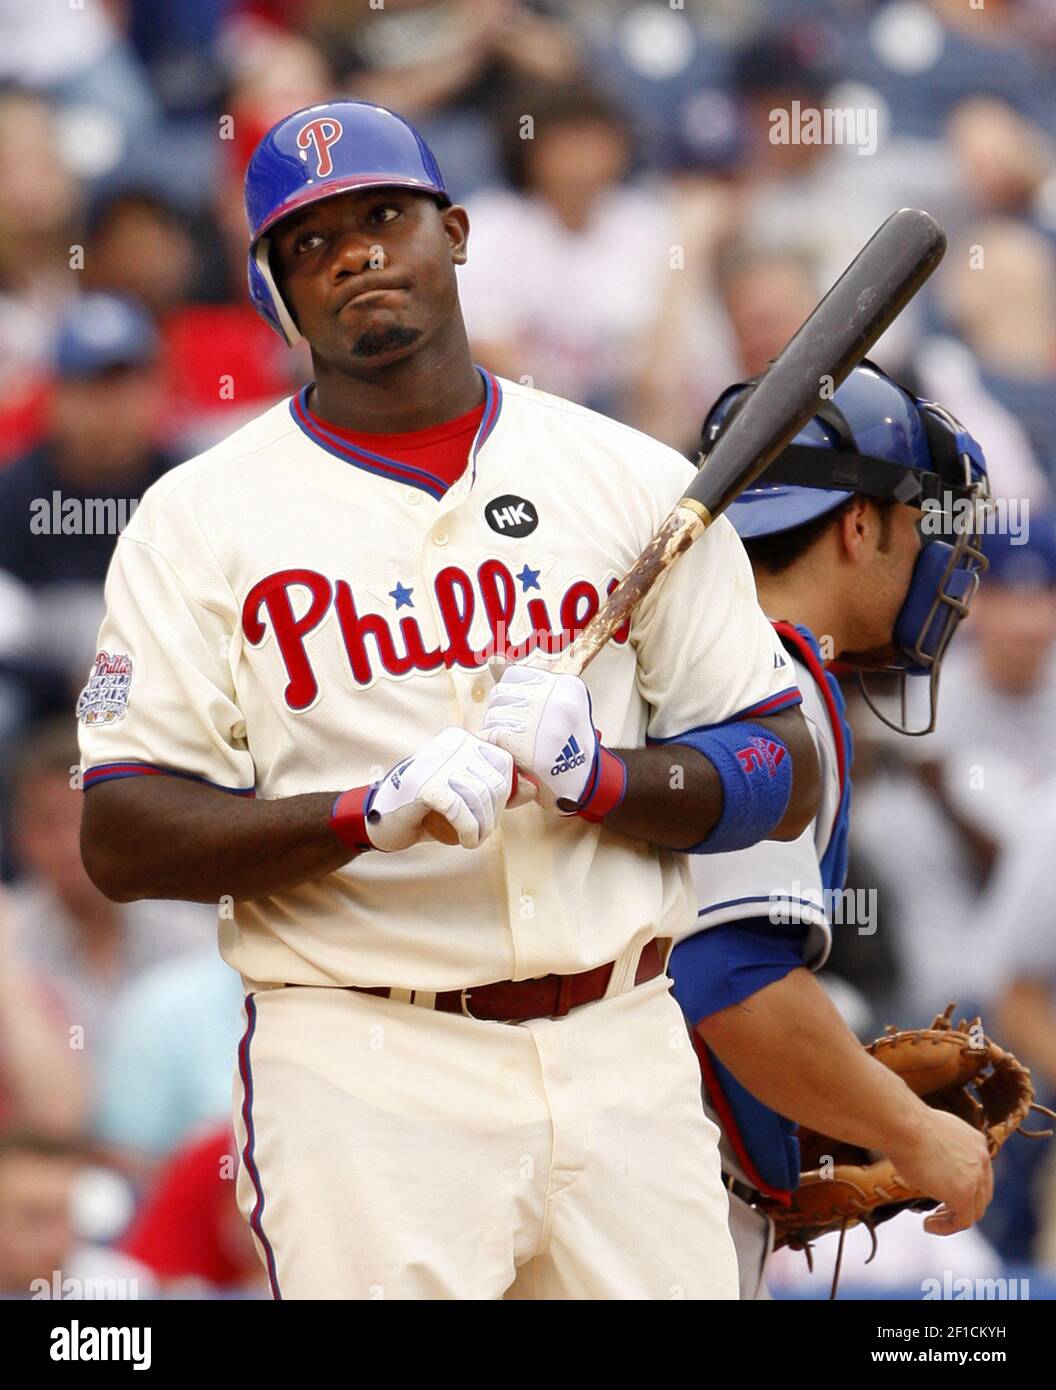 Philadelphia Phillies Ryan Howard strikes out to end the game against the  Los Angeles Dodgers in the 10th inning on Thursday, May 14, 2009, at  Citizens Bank Park in Philadelphia, Pennsylvania. The